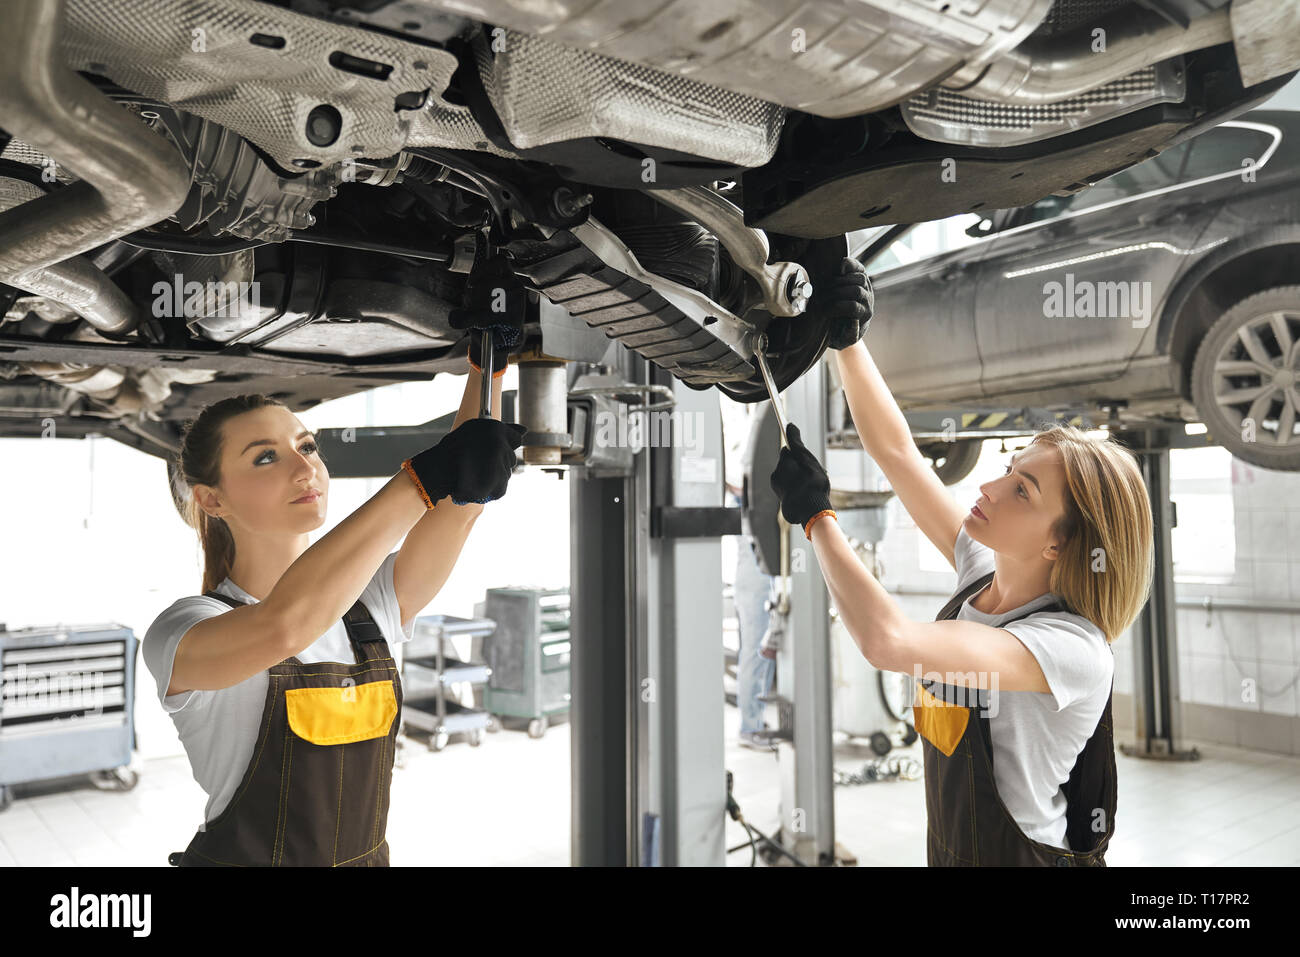 Two pretty young women in coveralls and black gloves looking up, repairing auto undercarriage. Professional female mechanics concentrated on fixing automobile. Stock Photo